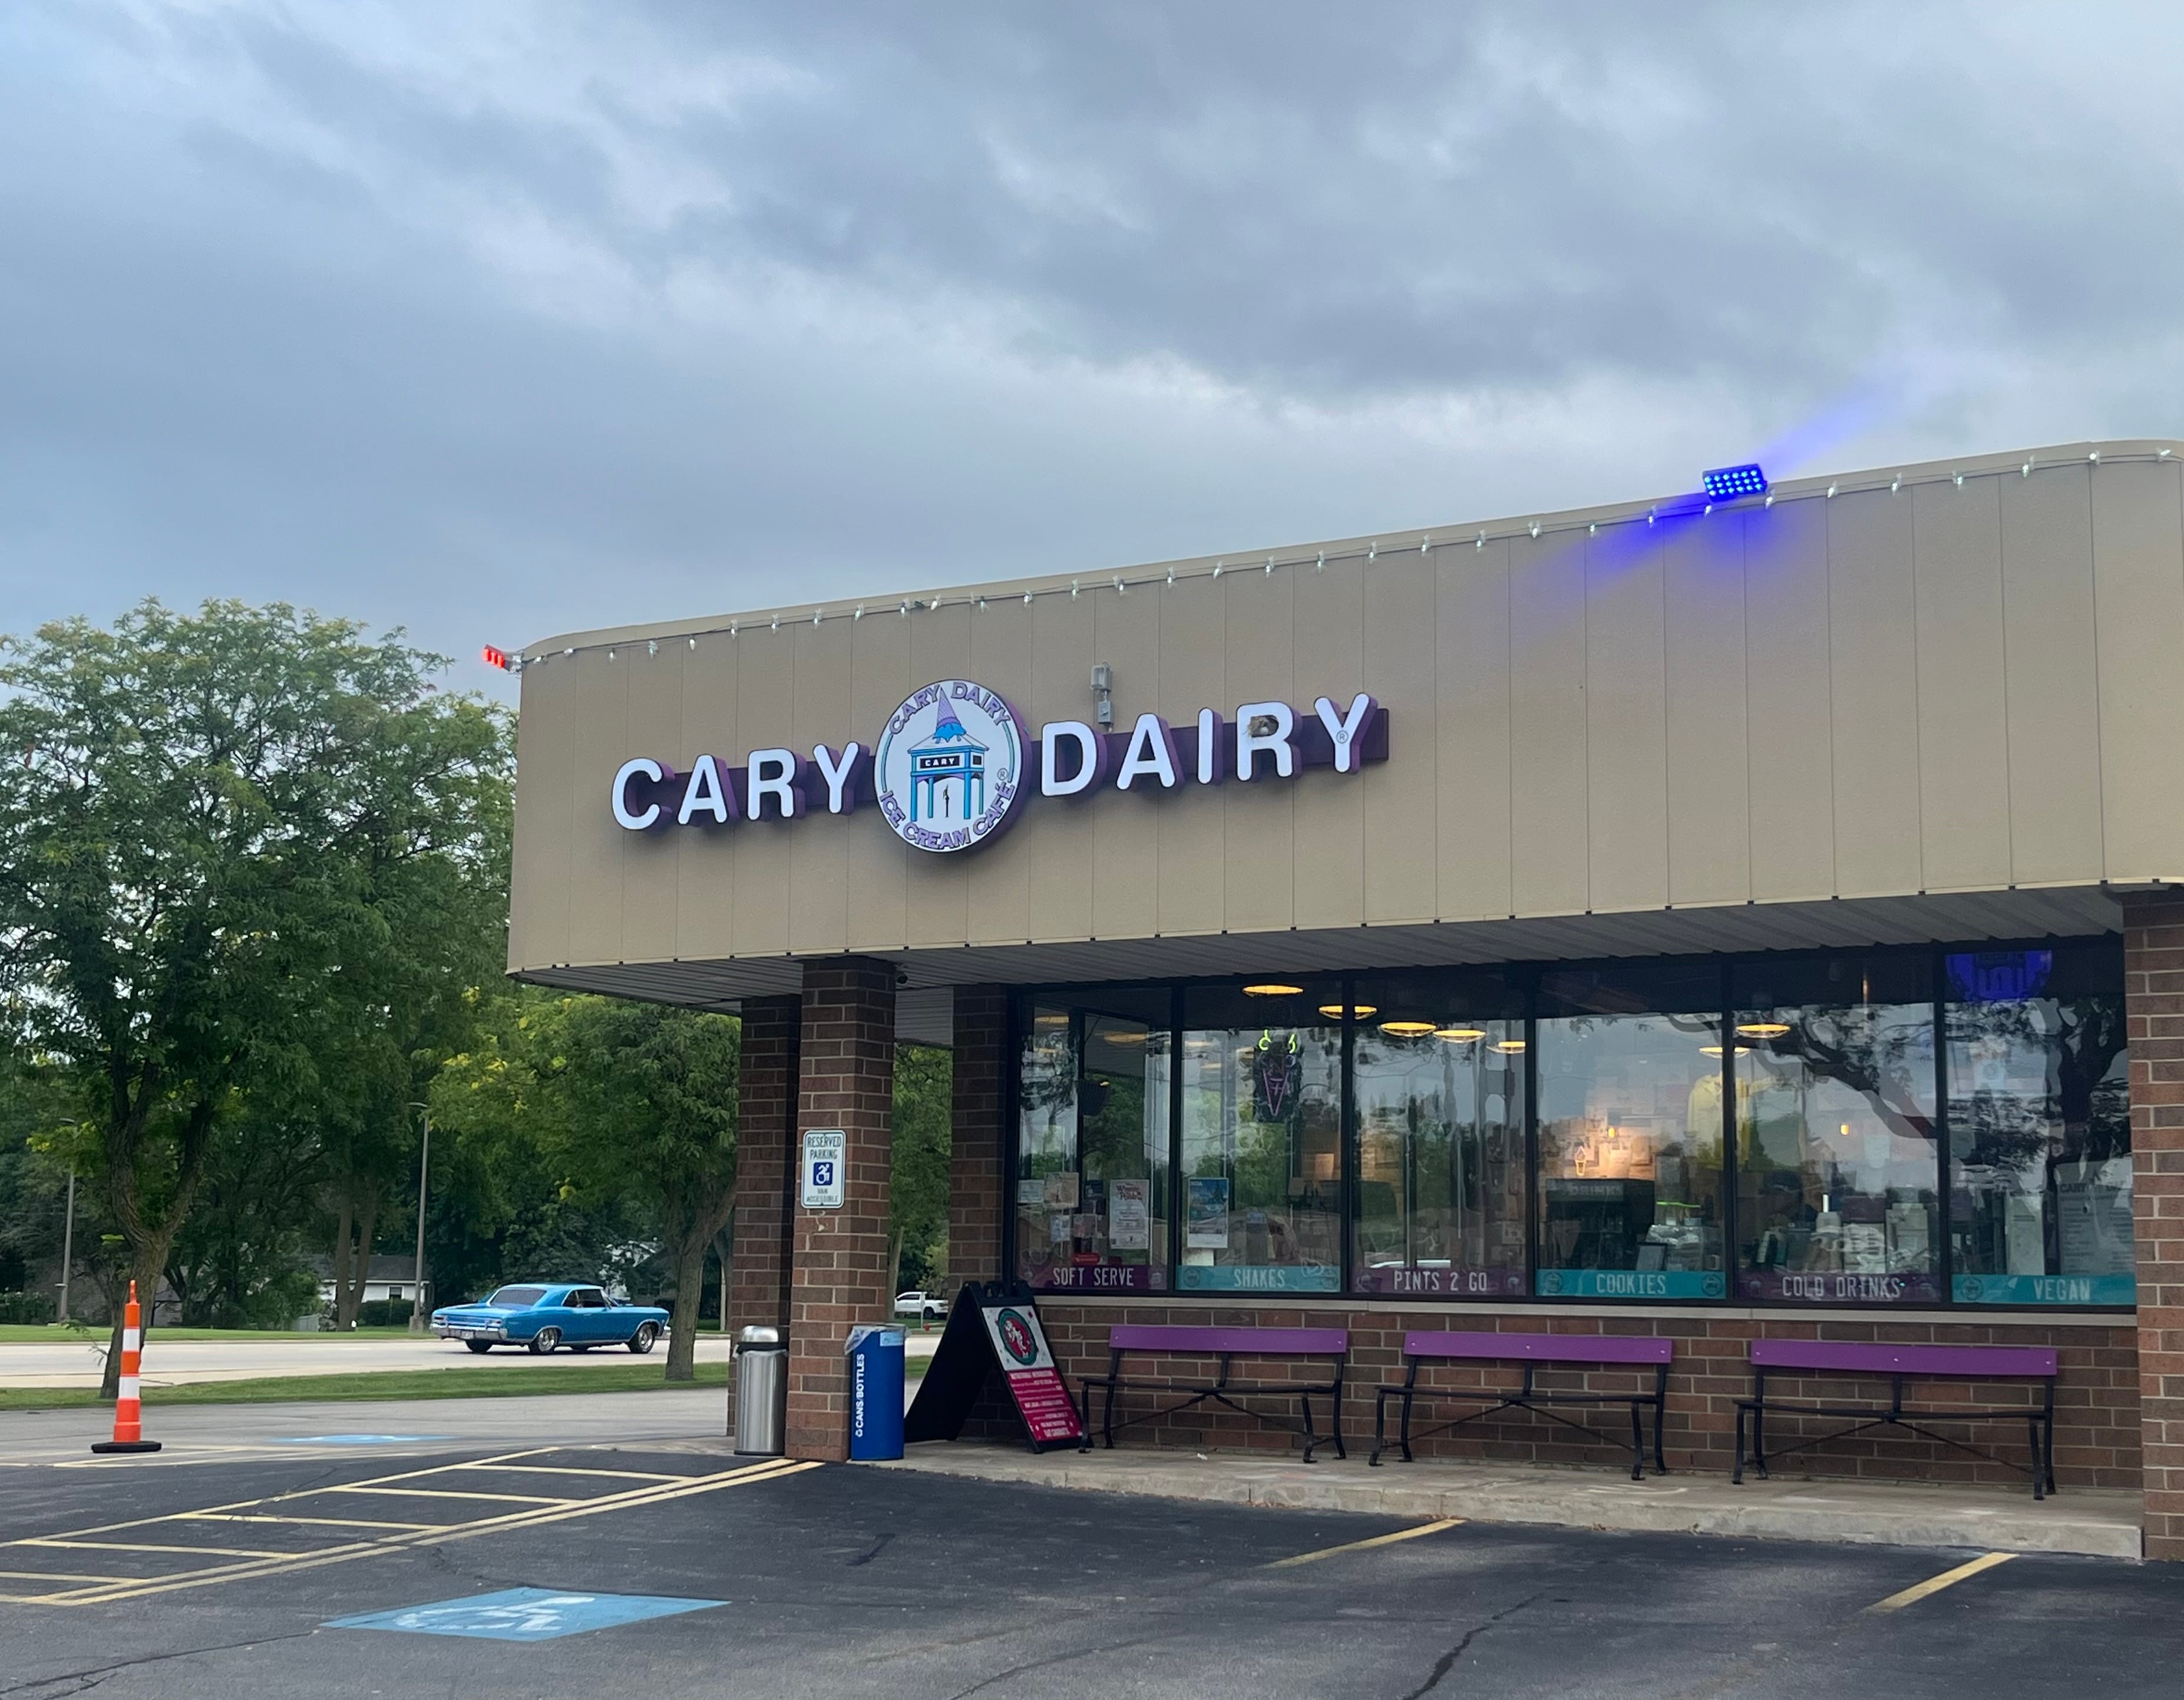 A McHenry County judge ordered Cary Dairy ice cream shop to pay fines and follow the village of Cary’s sign ordinance after a years-long dispute. A window sign - not the marquee sign shown here - was the cause of the dispute.